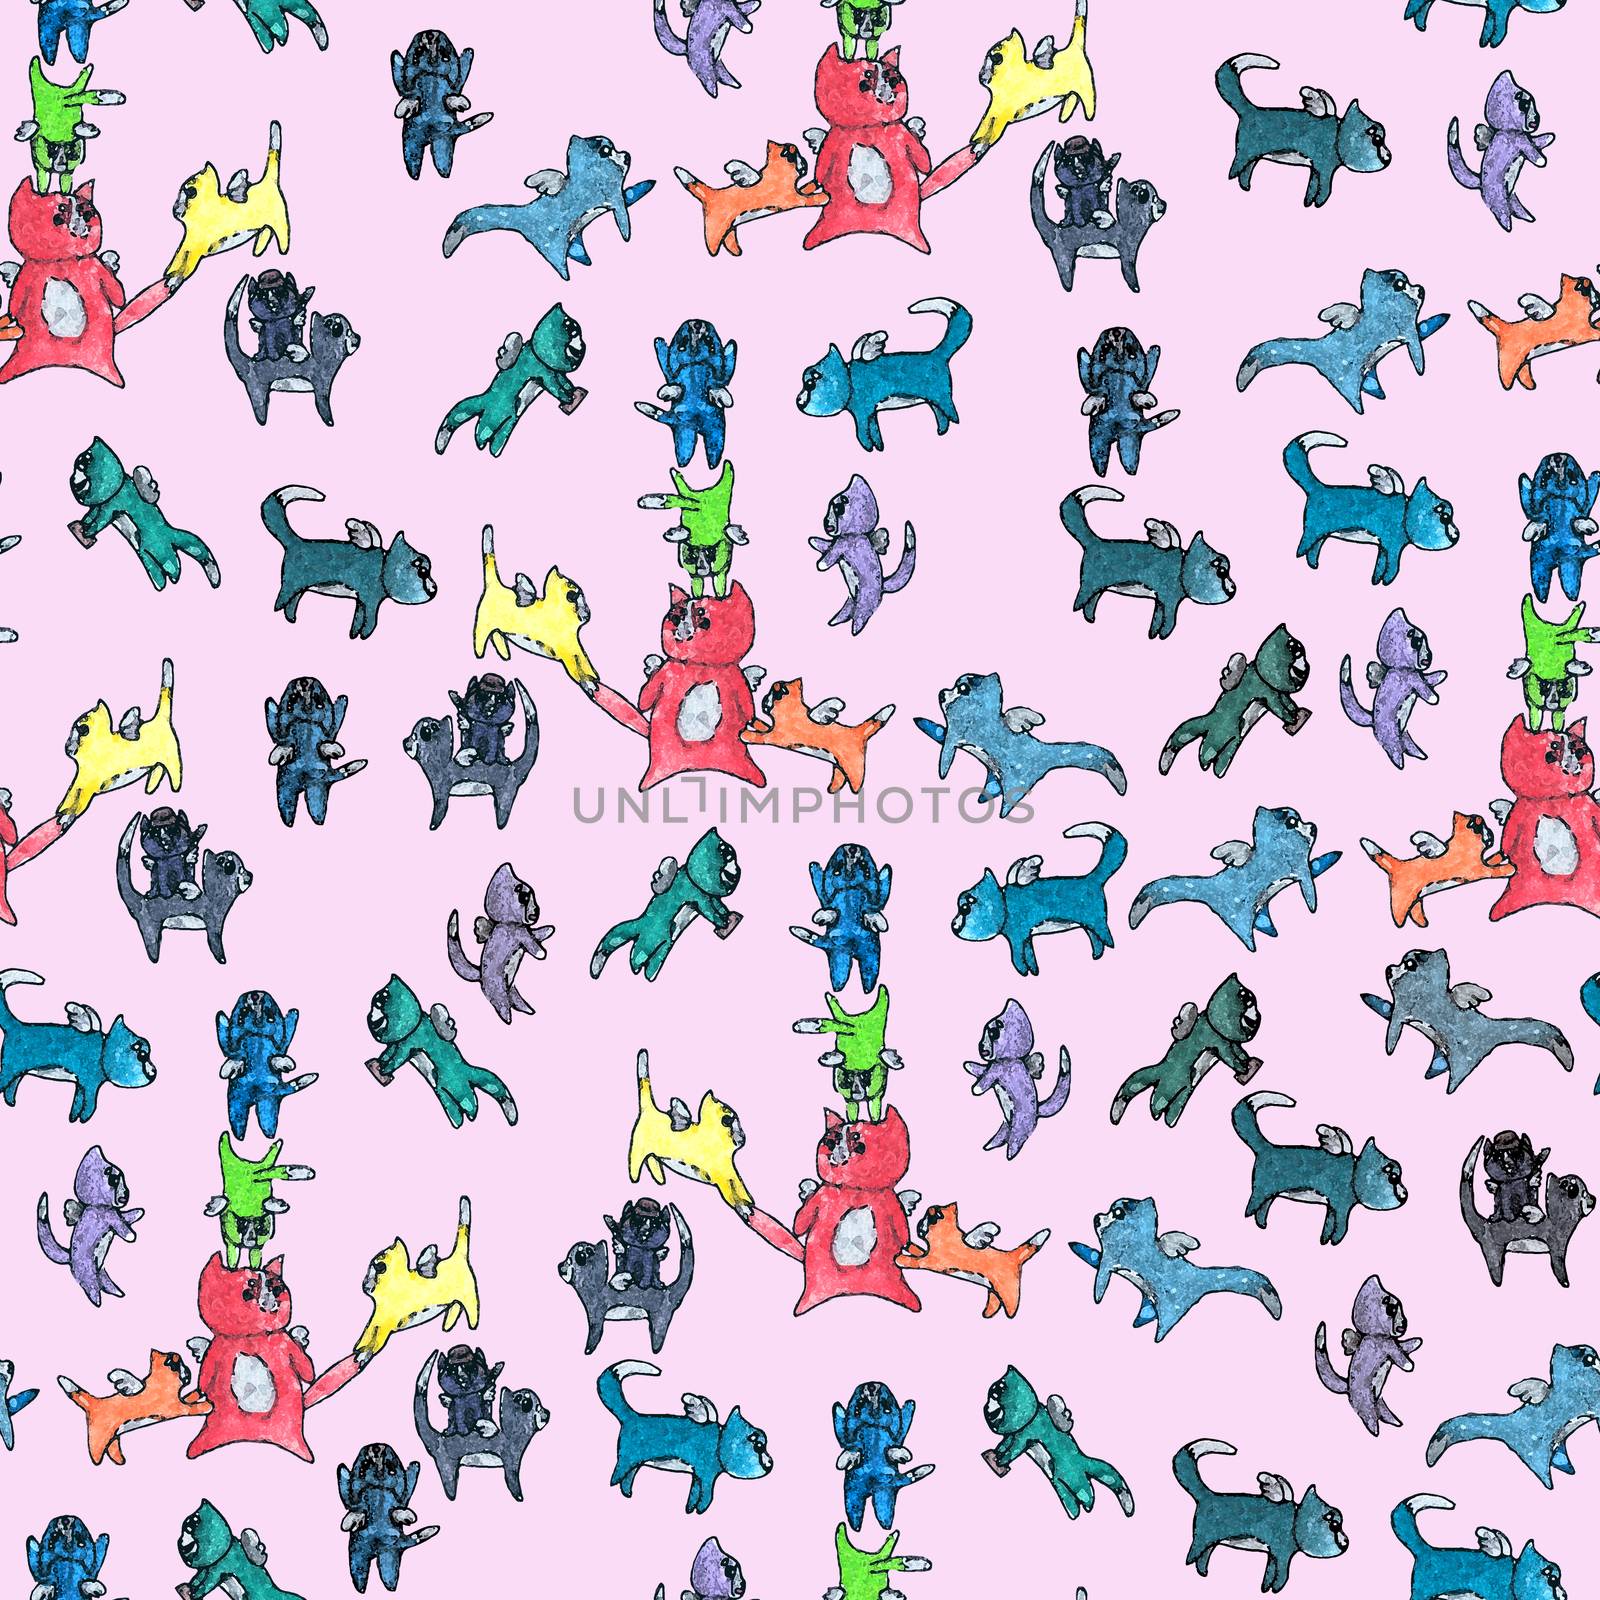 Watercolor Pattern of Flying Cats on Pink Background by gstalker